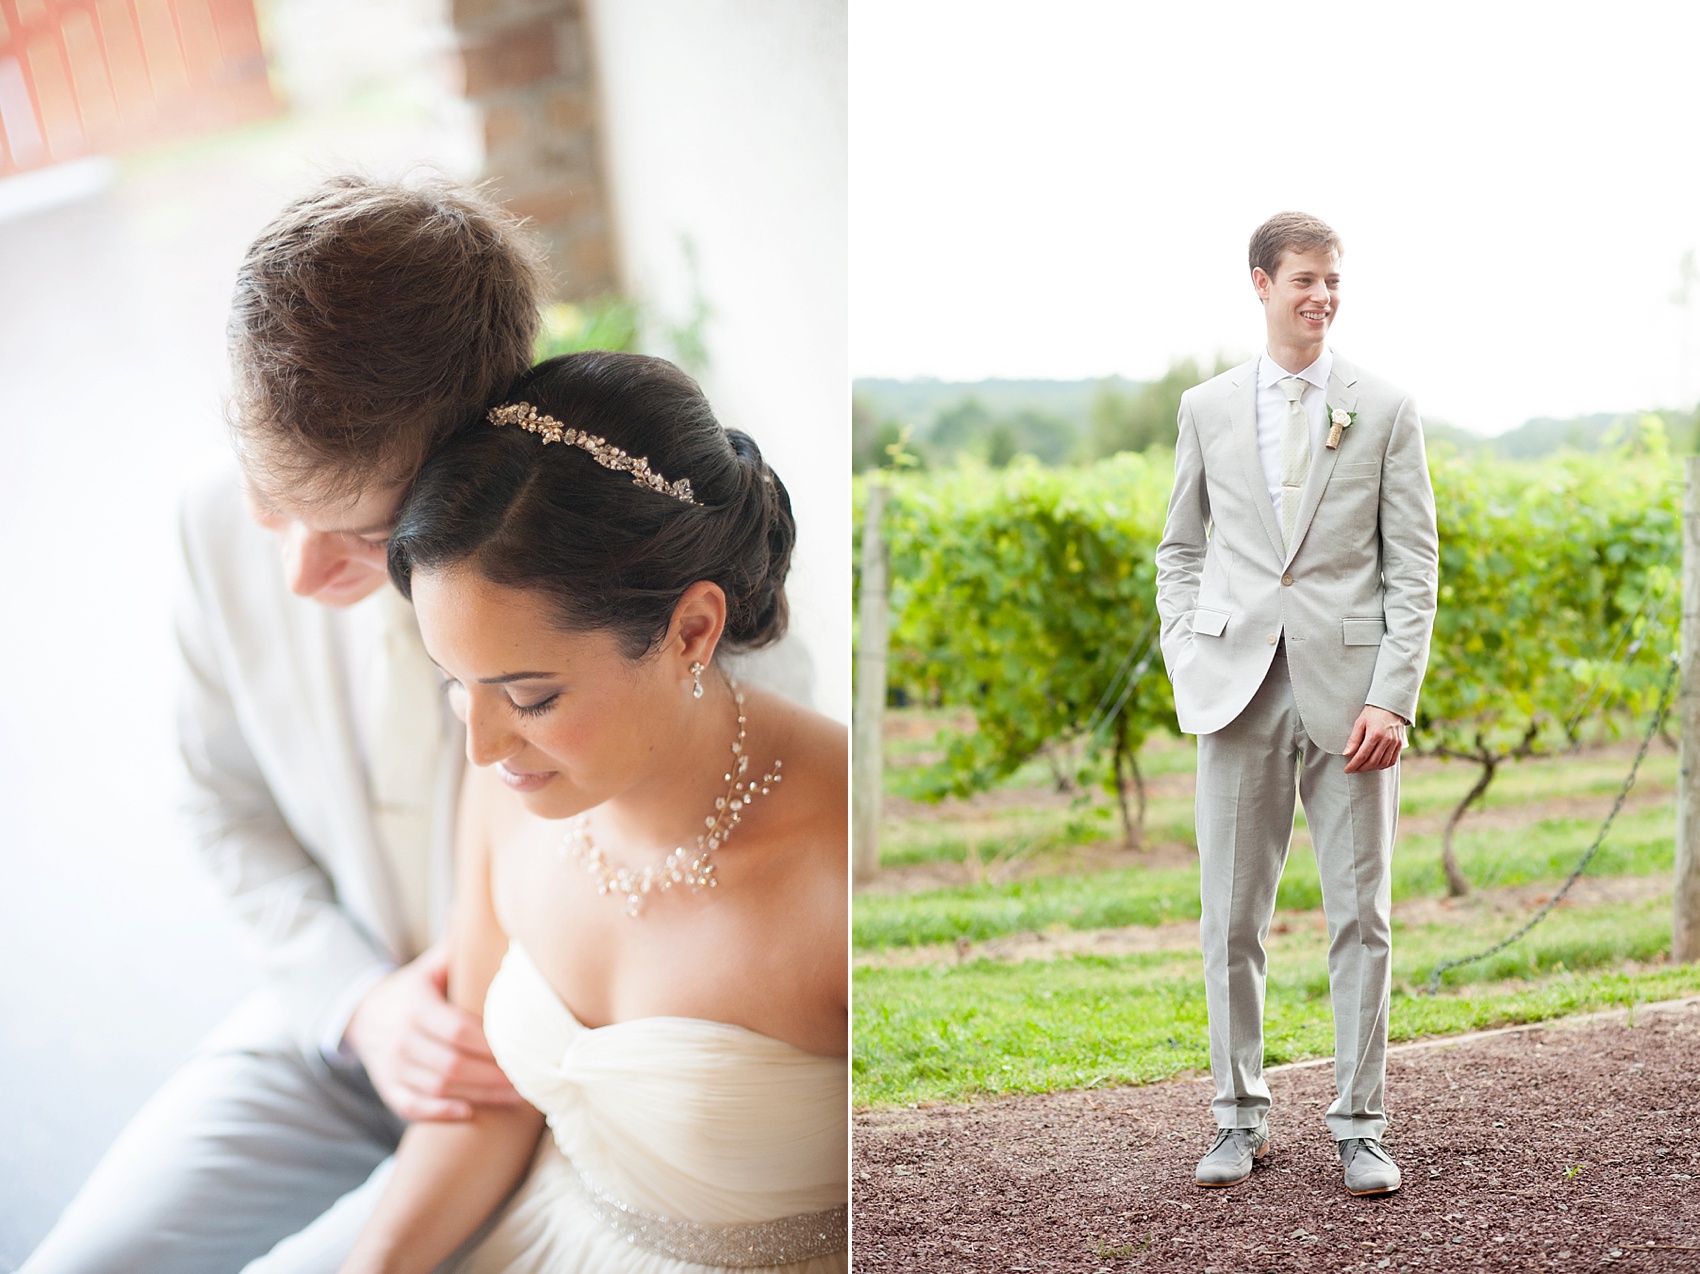 Bride in BHLDN, A Va Et Vien, and groom in J. Crew for a summer vineyard wedding at Hopewell Valley Vineyards. Photos by New Jersey wedding photographer, Mikkel Paige Photography.